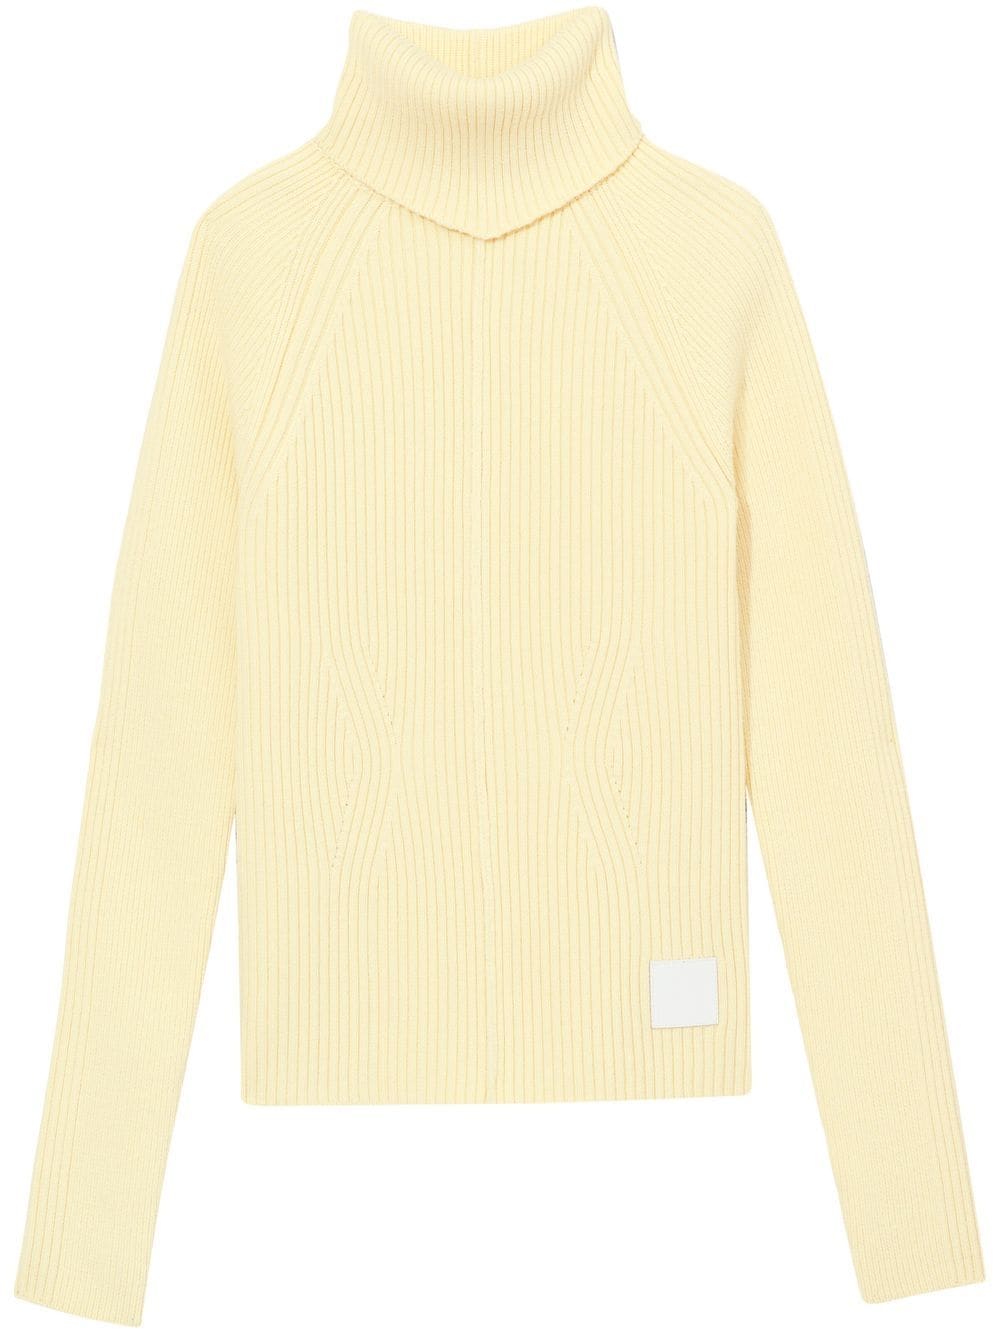 Marc Jacobs ribbed turtleneck jumper - Yellow von Marc Jacobs